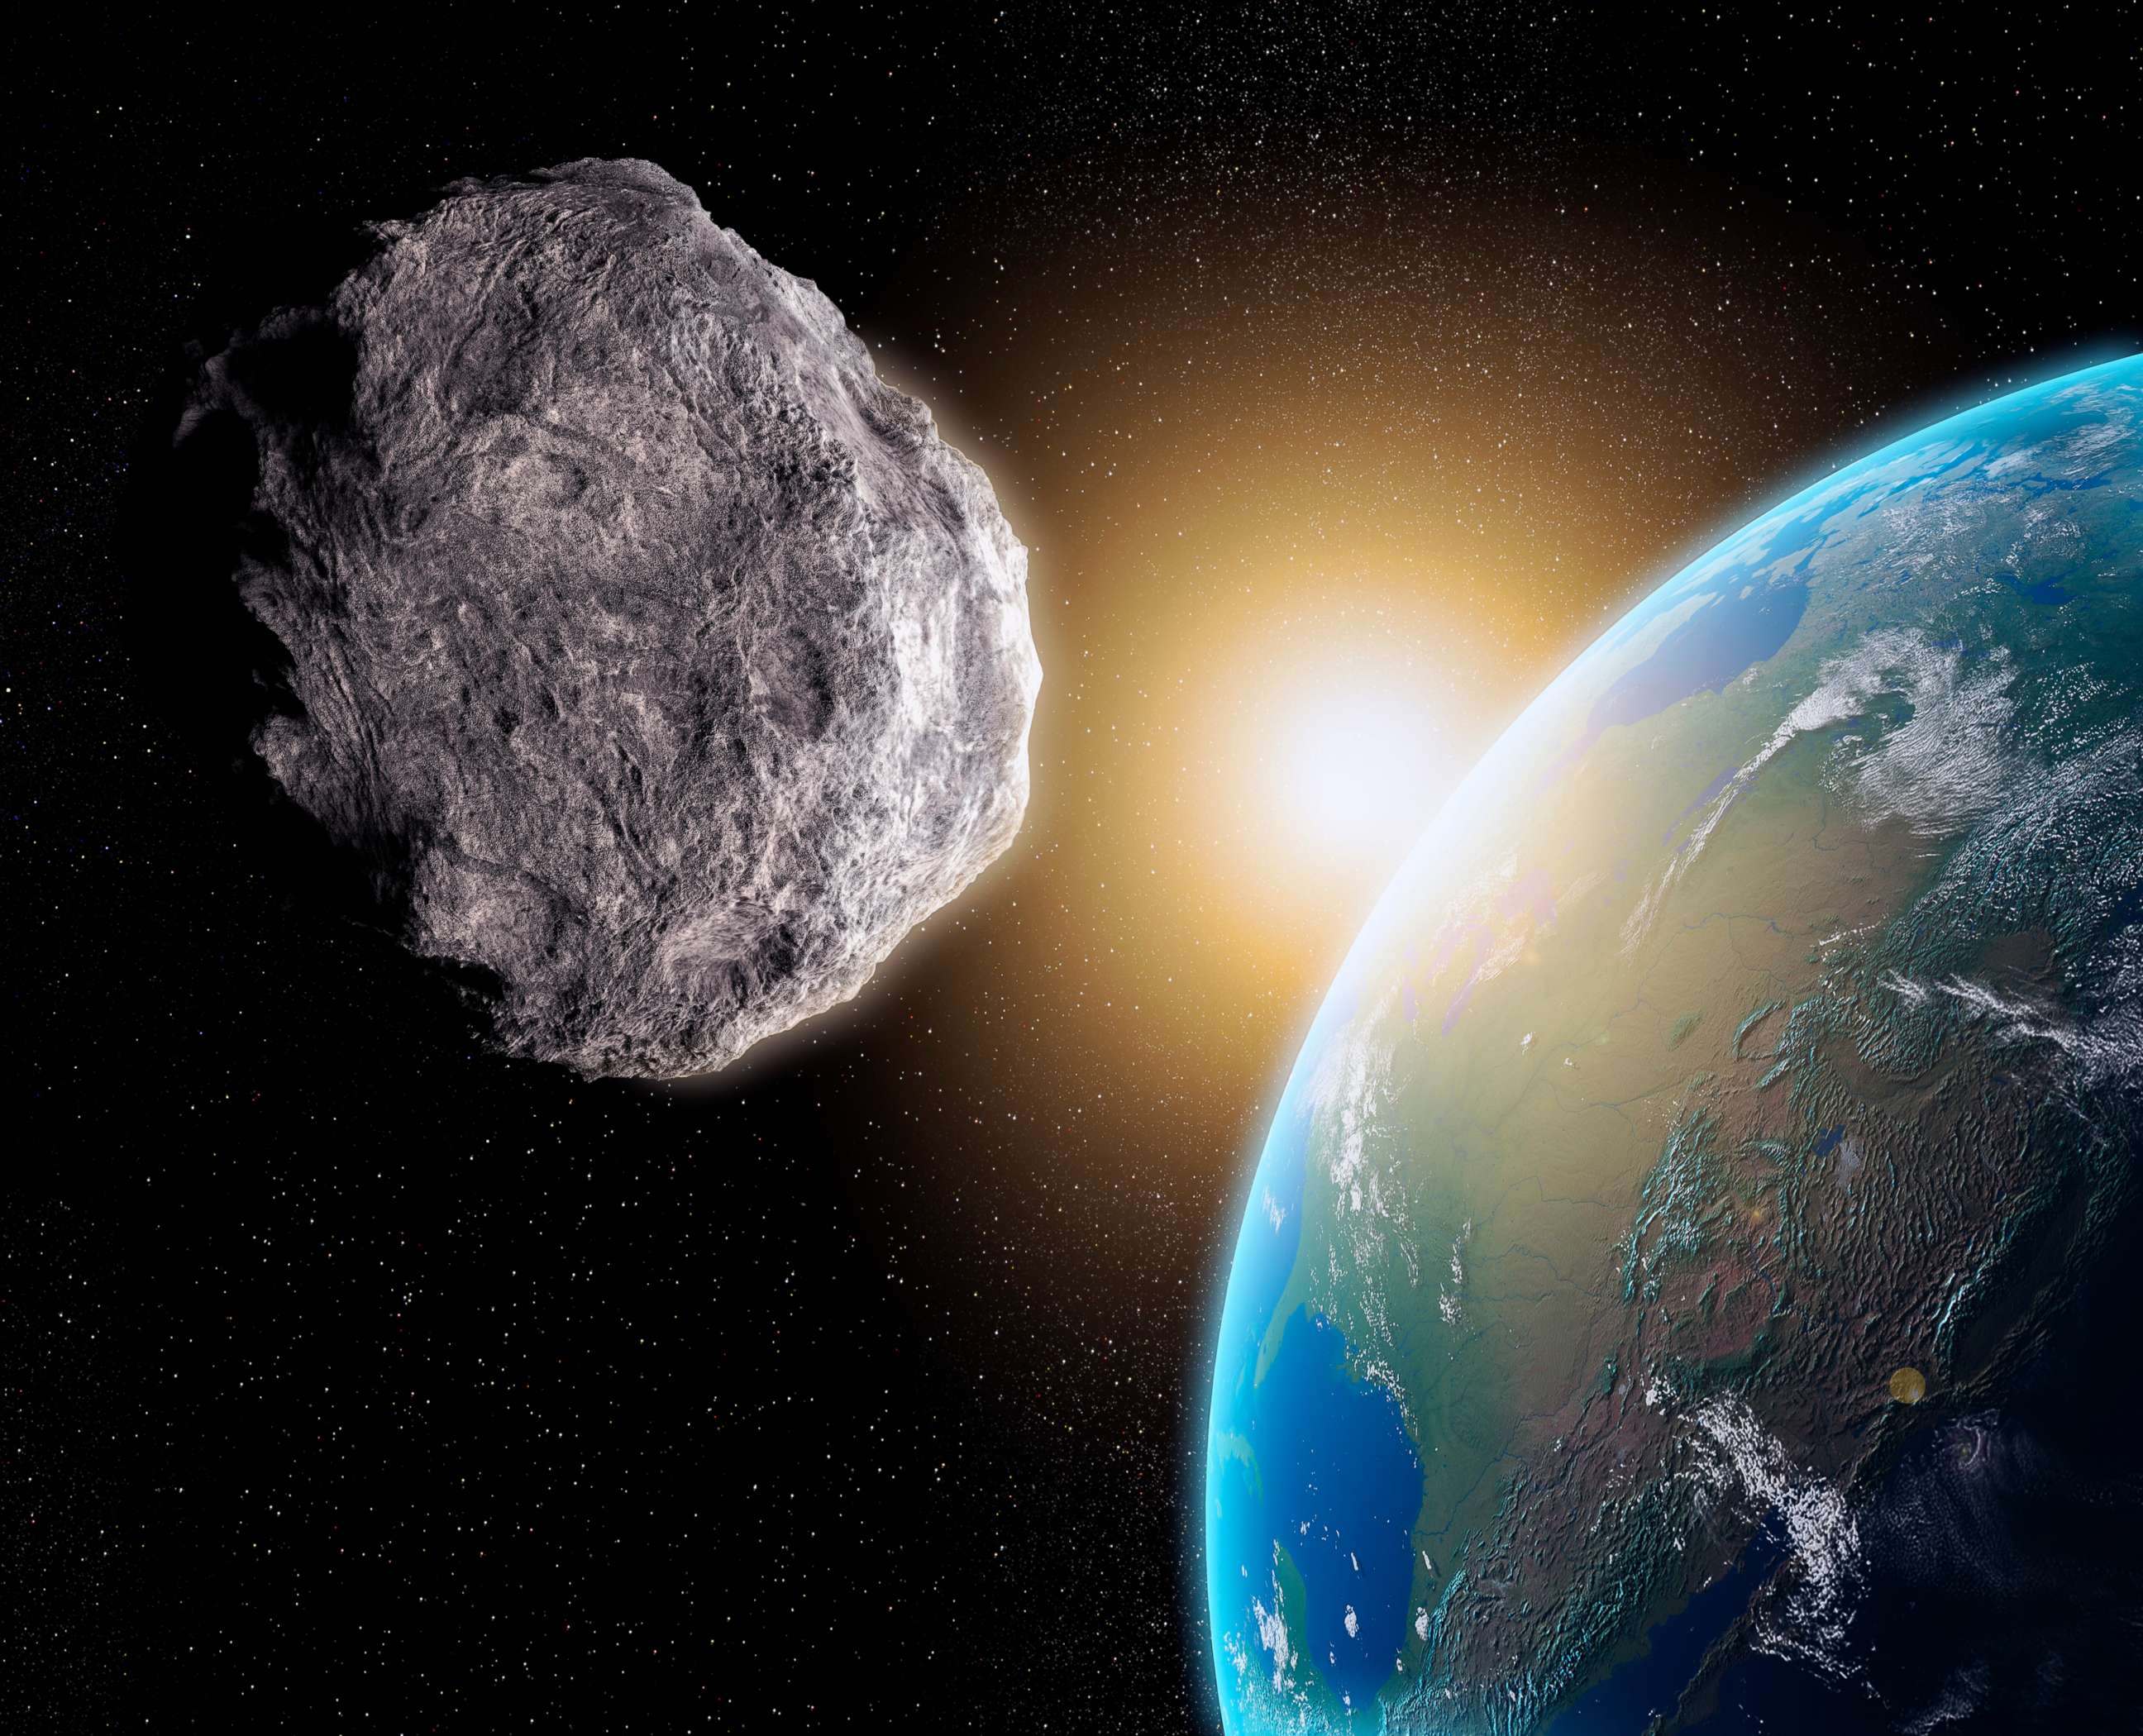 PHOTO: An illustration of a near-Earth asteroid is seen here.